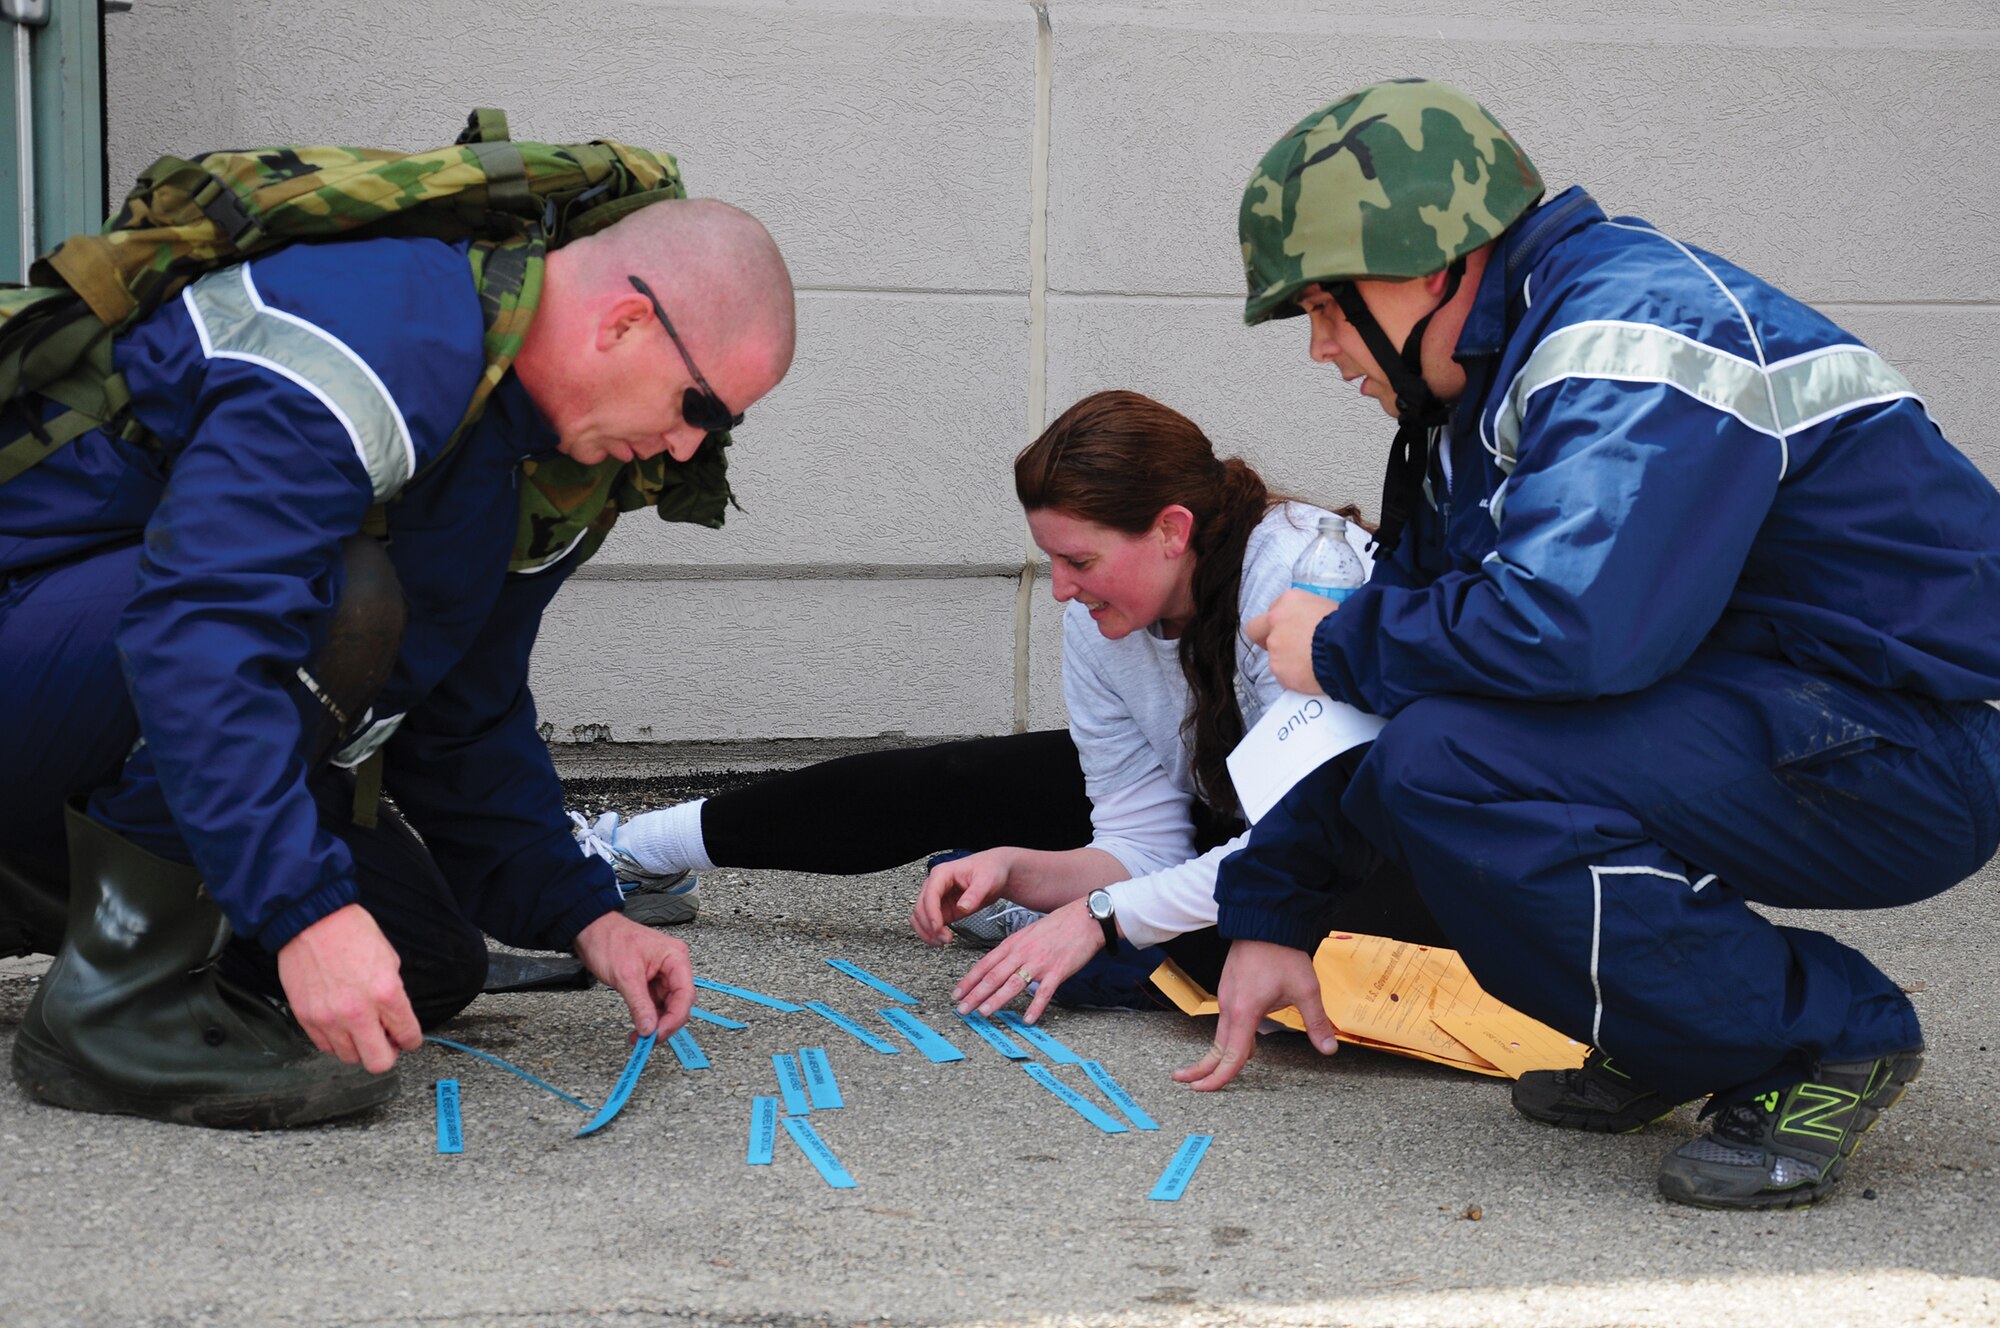 WRIGHT-PATTERSON AIR FORCE BASE, Ohio - Tech. Sgt. Mike Neri, Master Sgt. Alicia Lavender and Senior Airman Jordan Reed, all from the 445th Maintenance Group, unscramble words to create sentences as part of the 445th Maintenance Group Amazing Race teambuilding exercise April 6, 2014. (U.S. Air Force photo/Capt. Elizabeth Caraway)